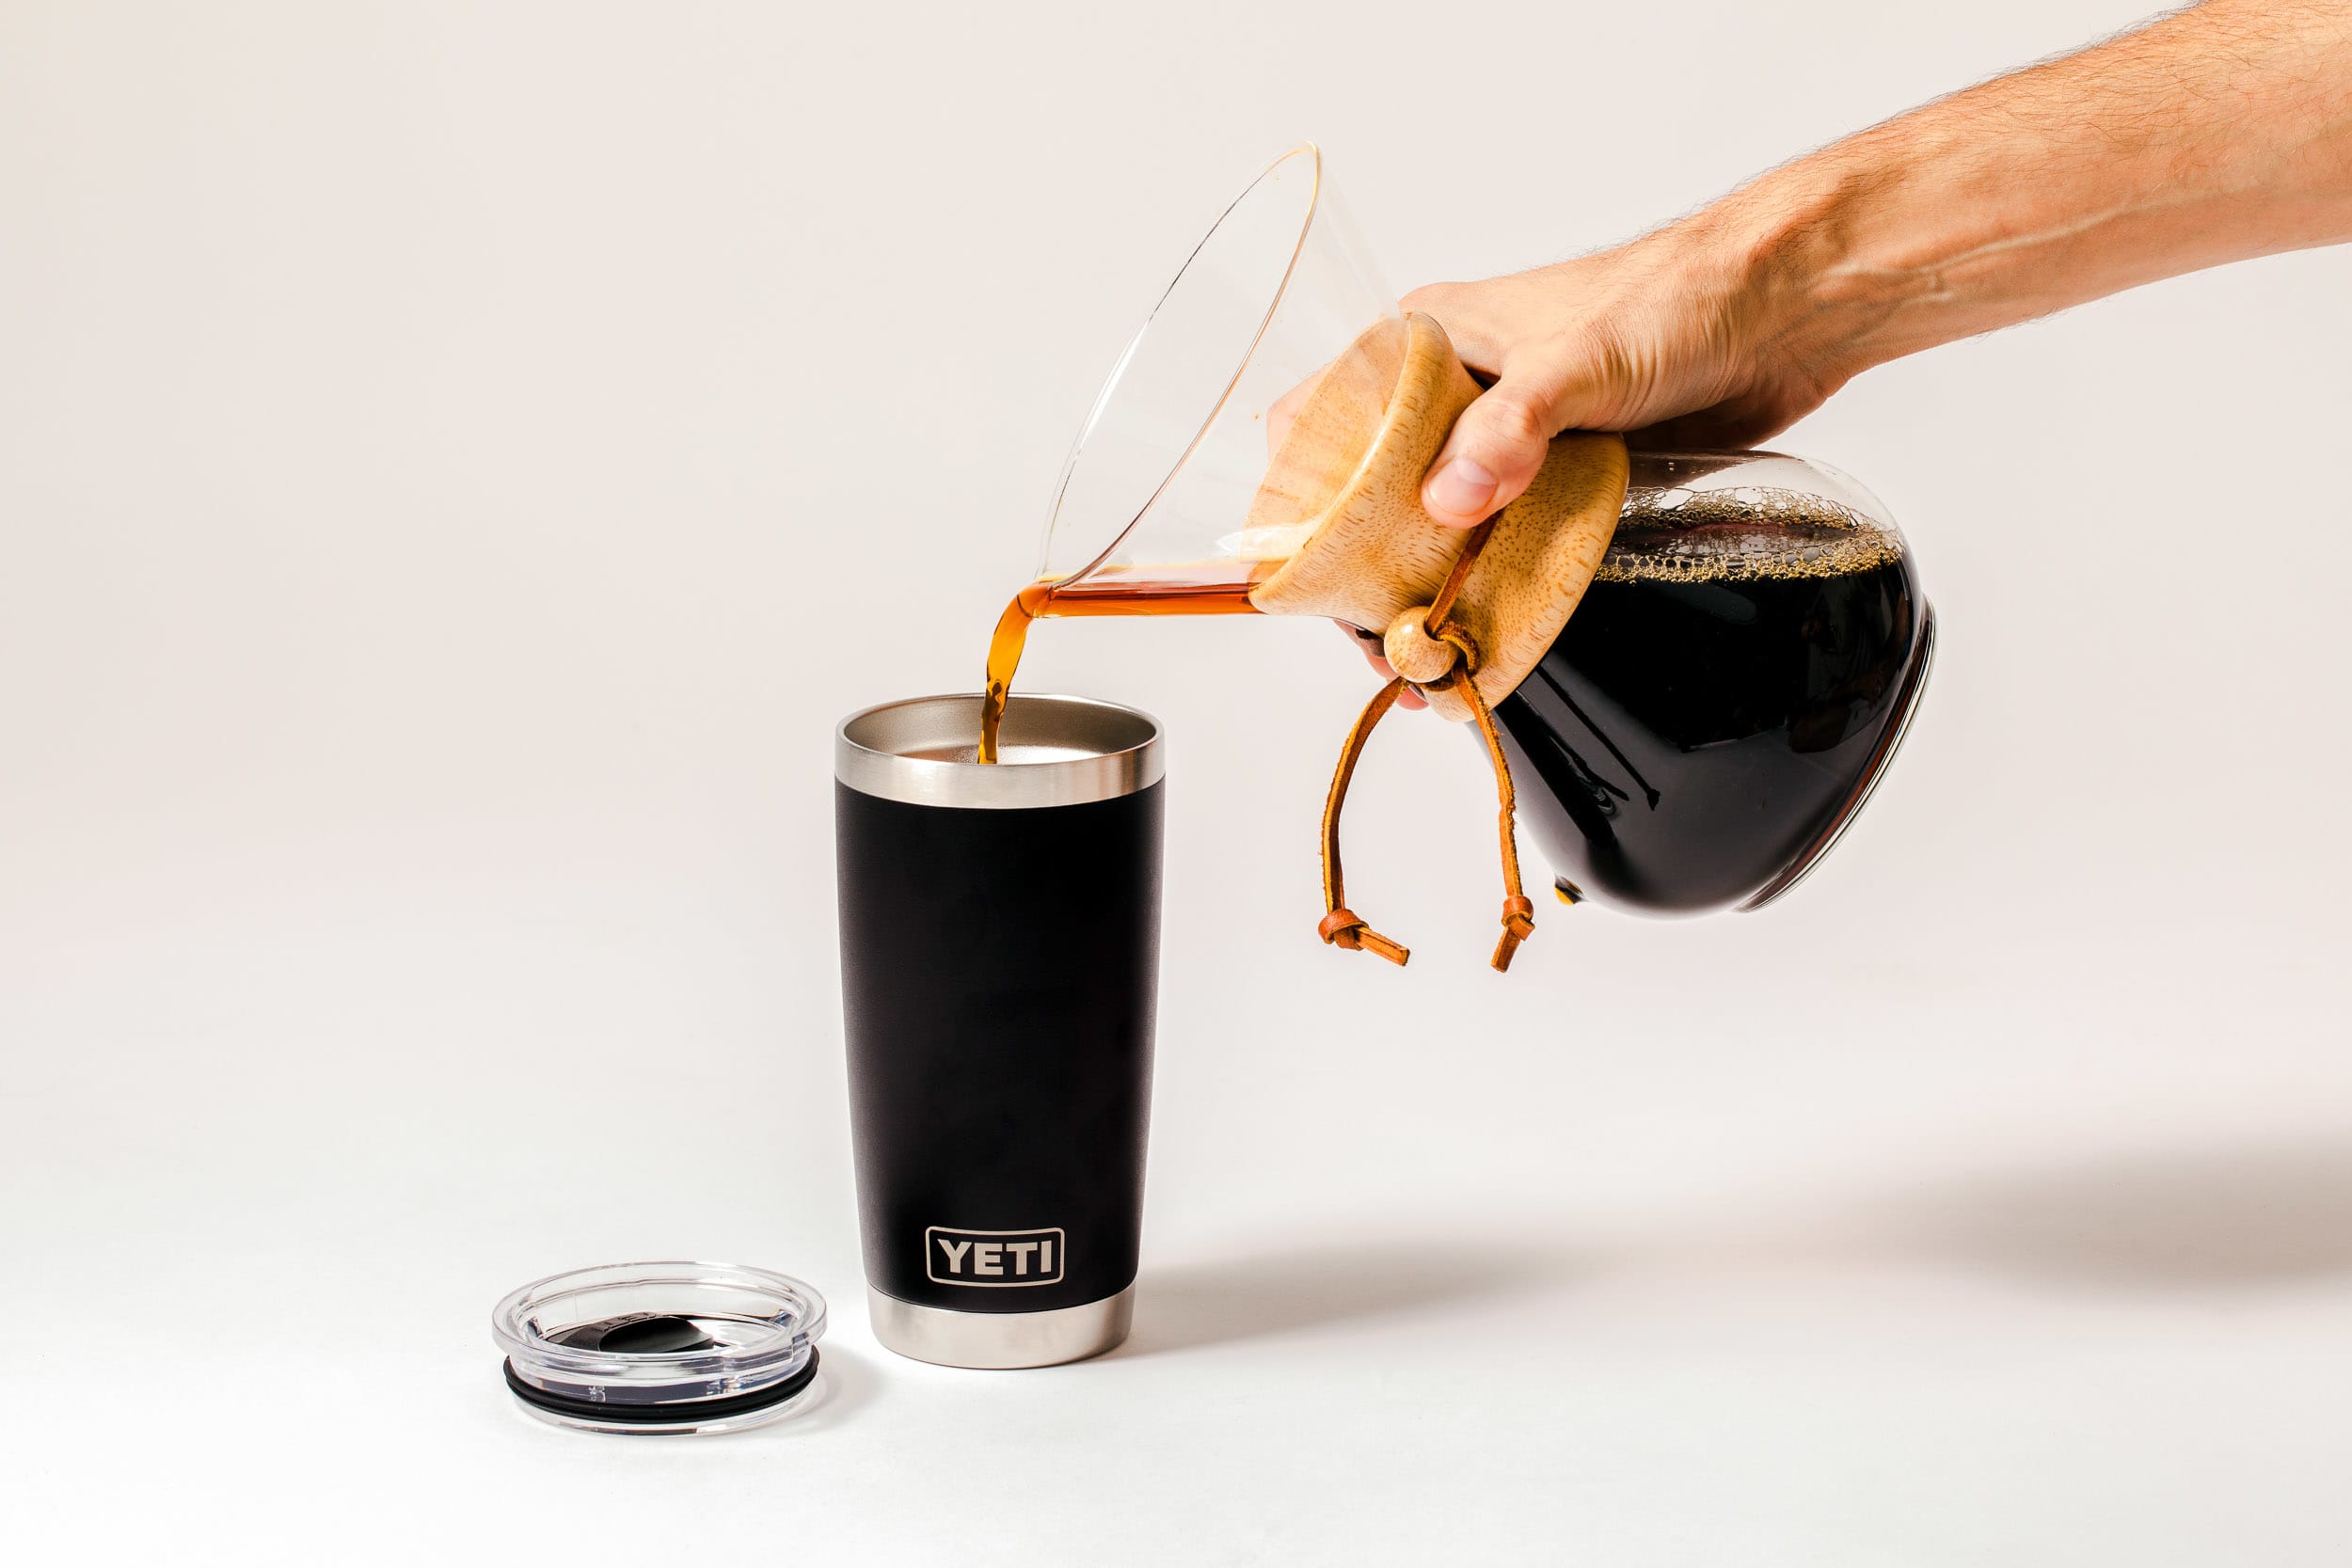 Top 5: Best Insulated Coffee Mug With Lid and Handle